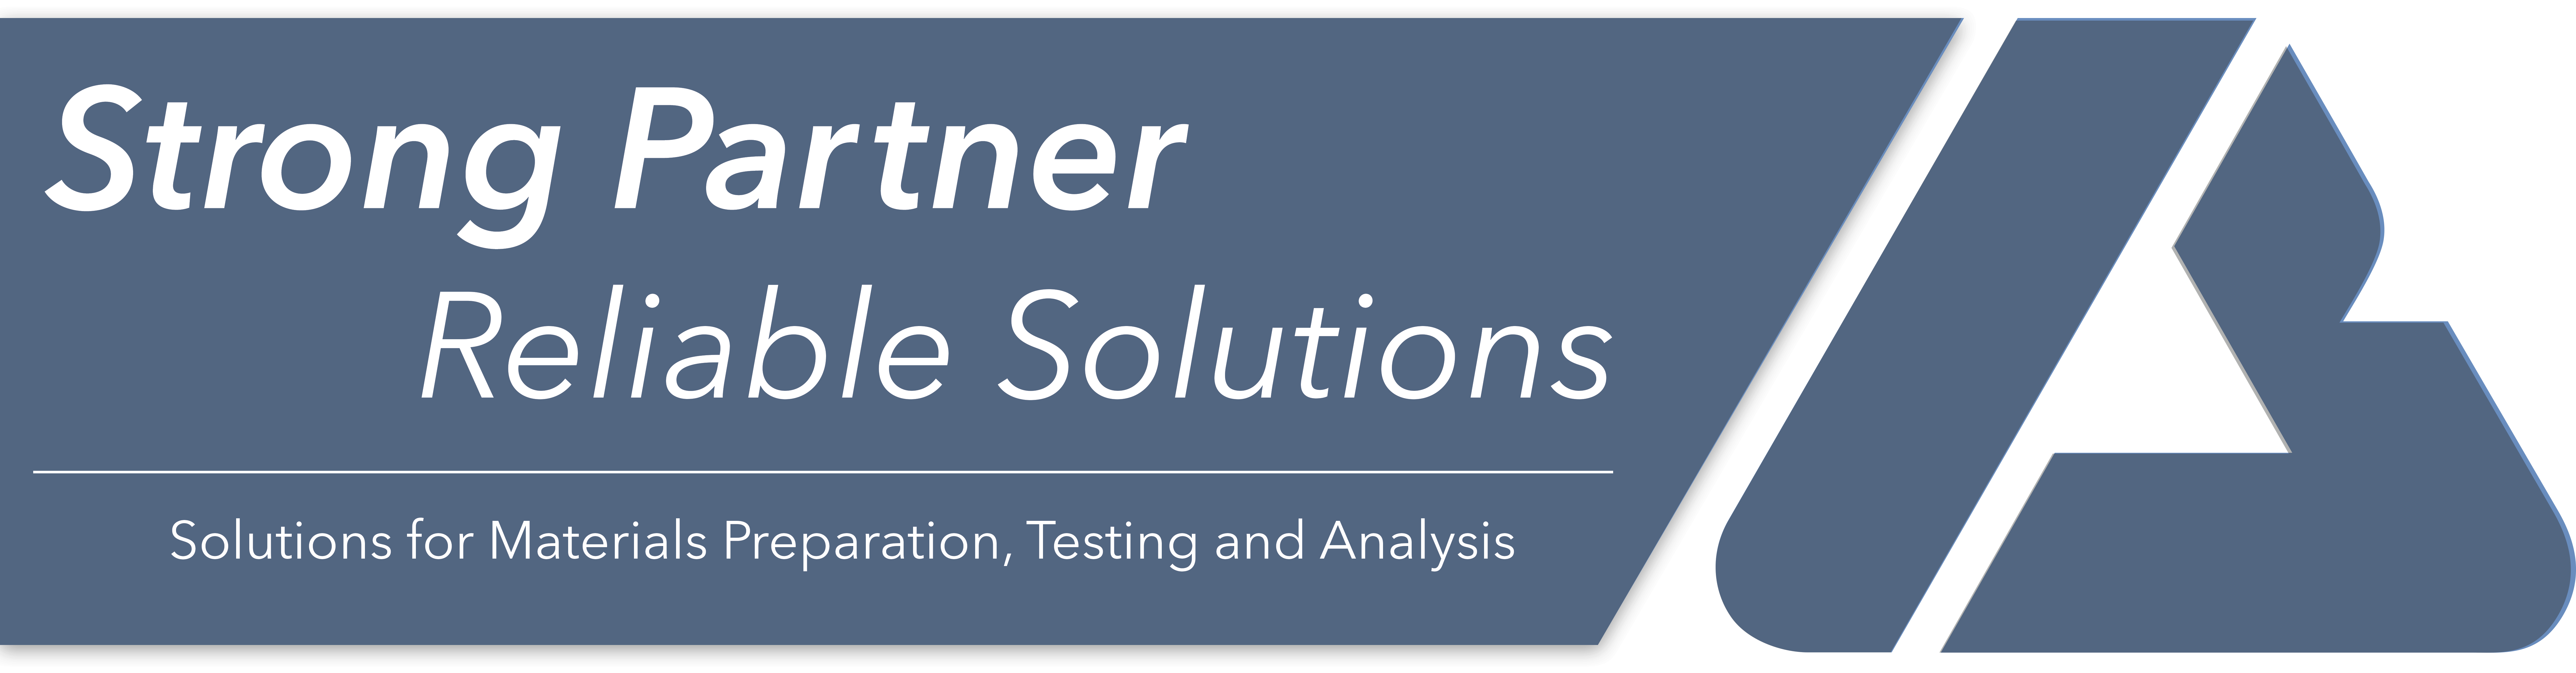 Stronger Partner Reliable Solutions